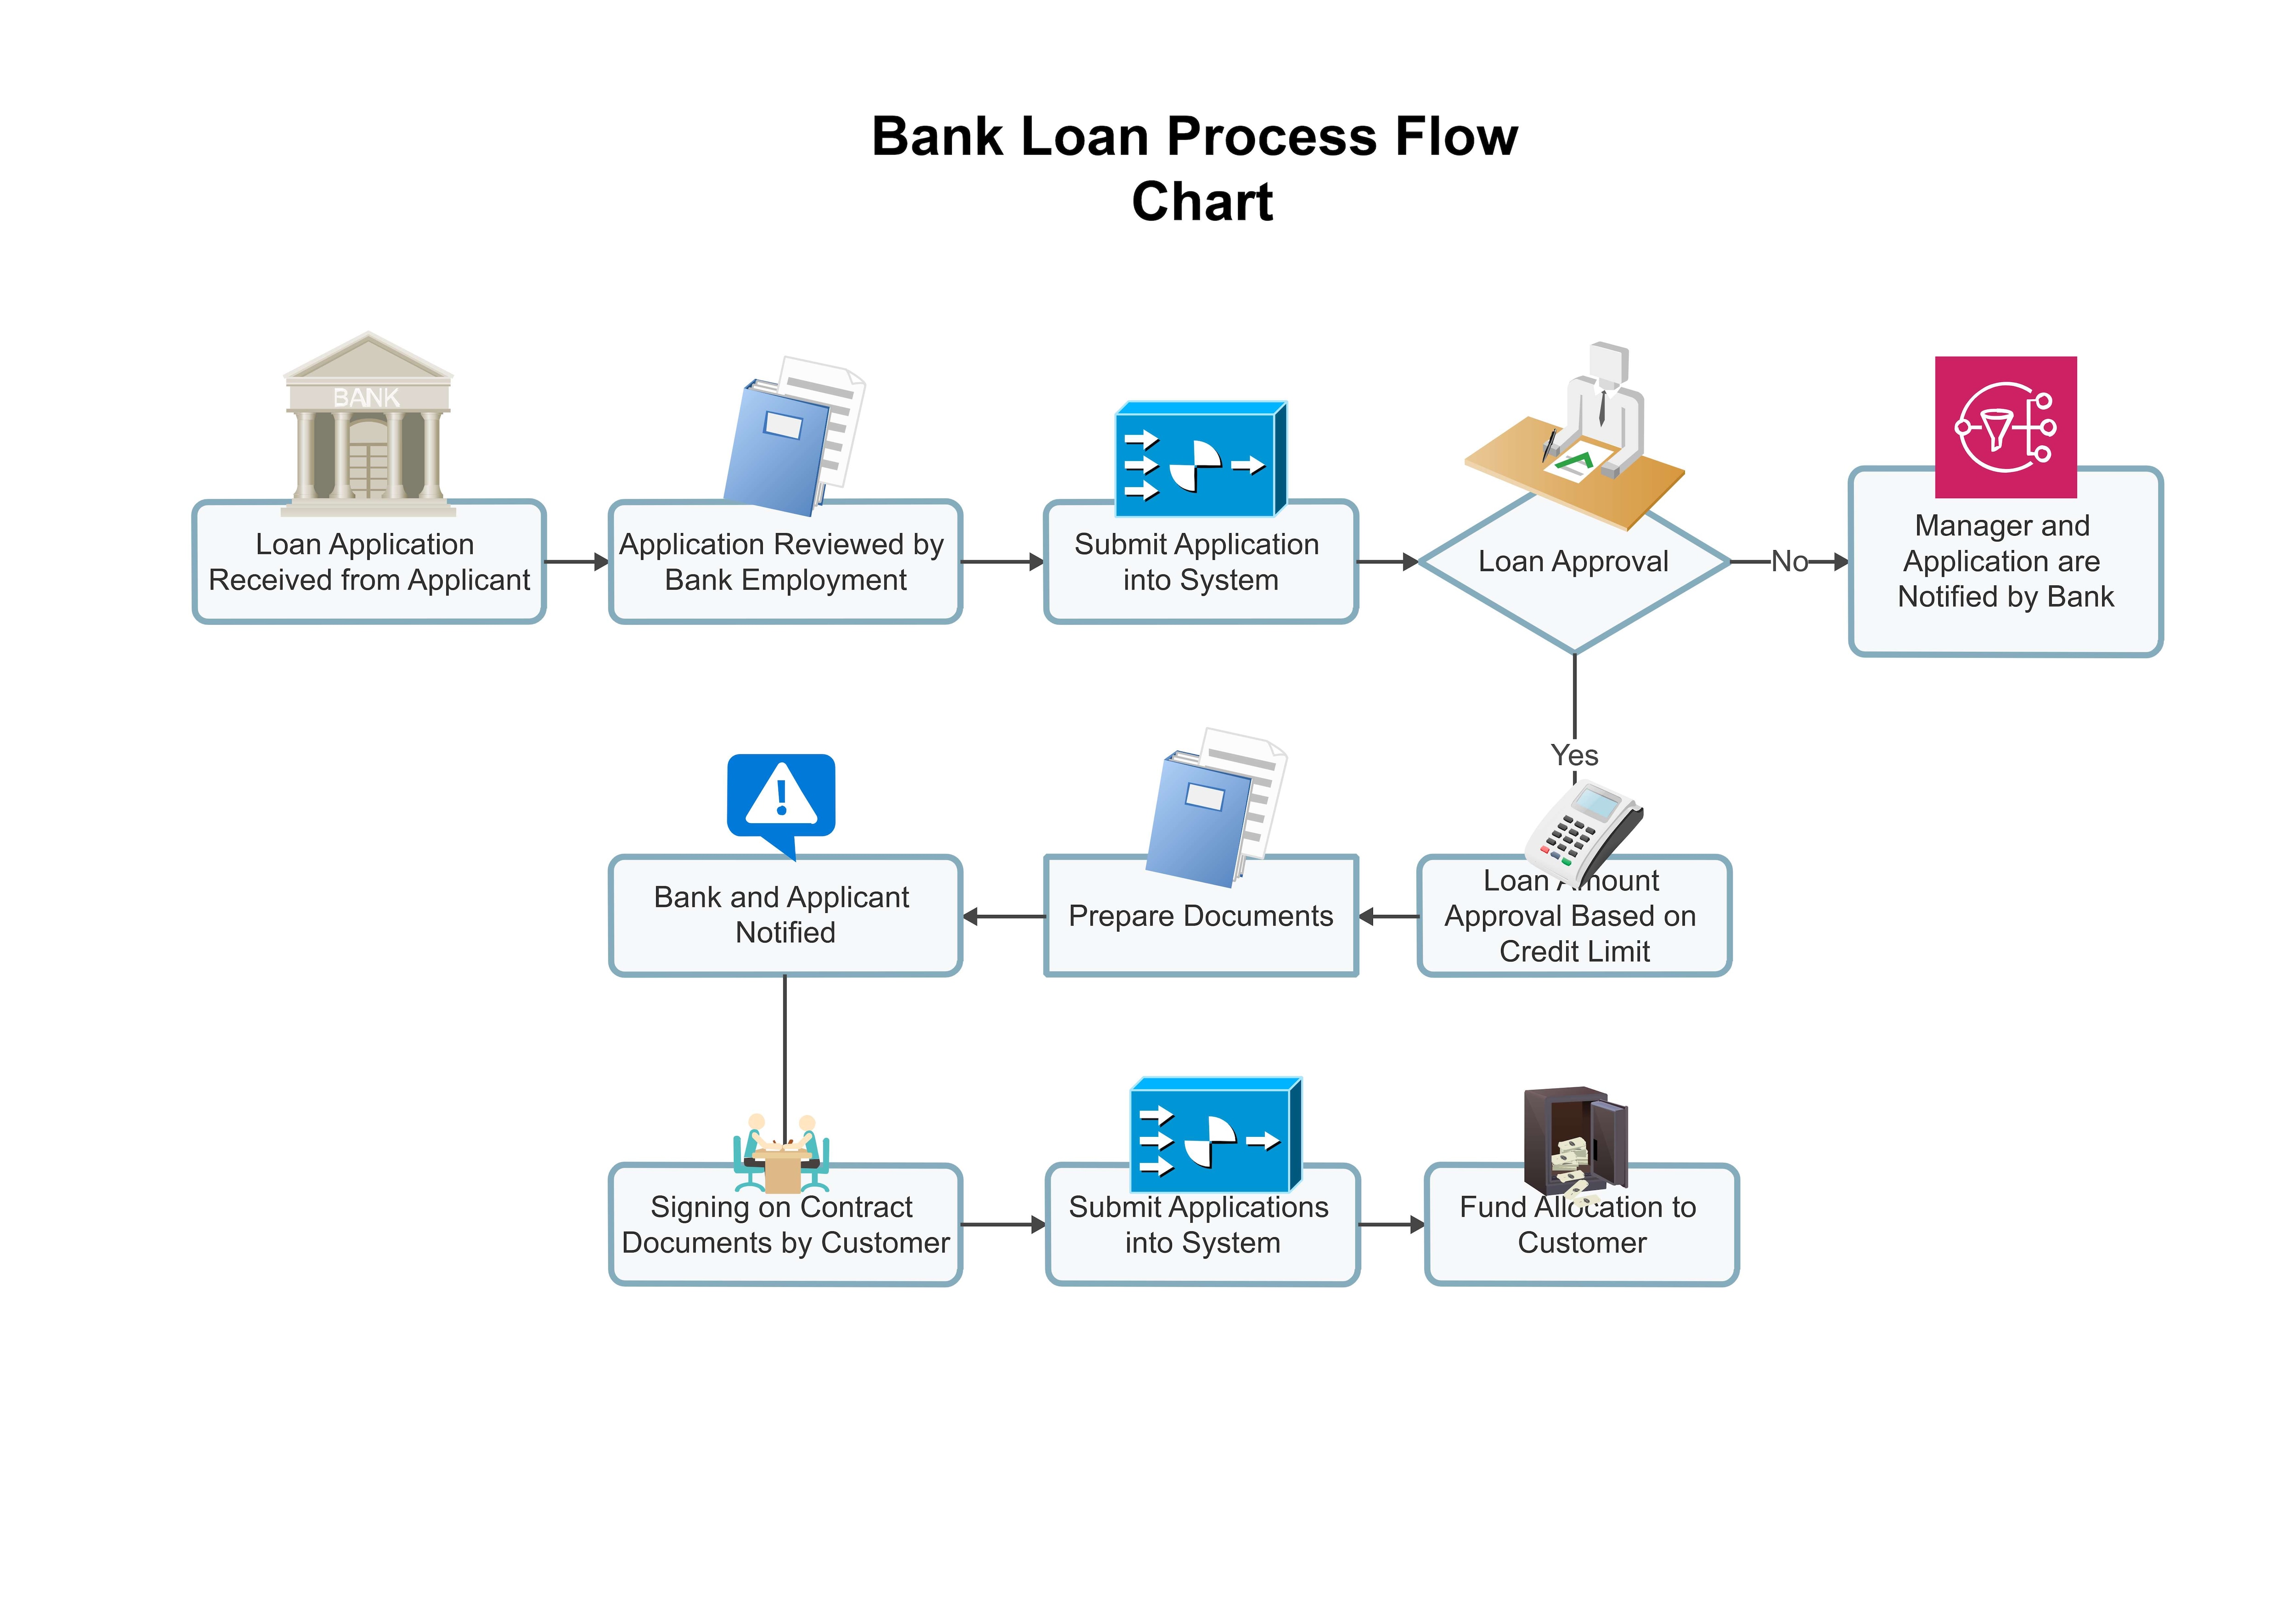 Bank Loan Process Flow Charts – Importance and Examples